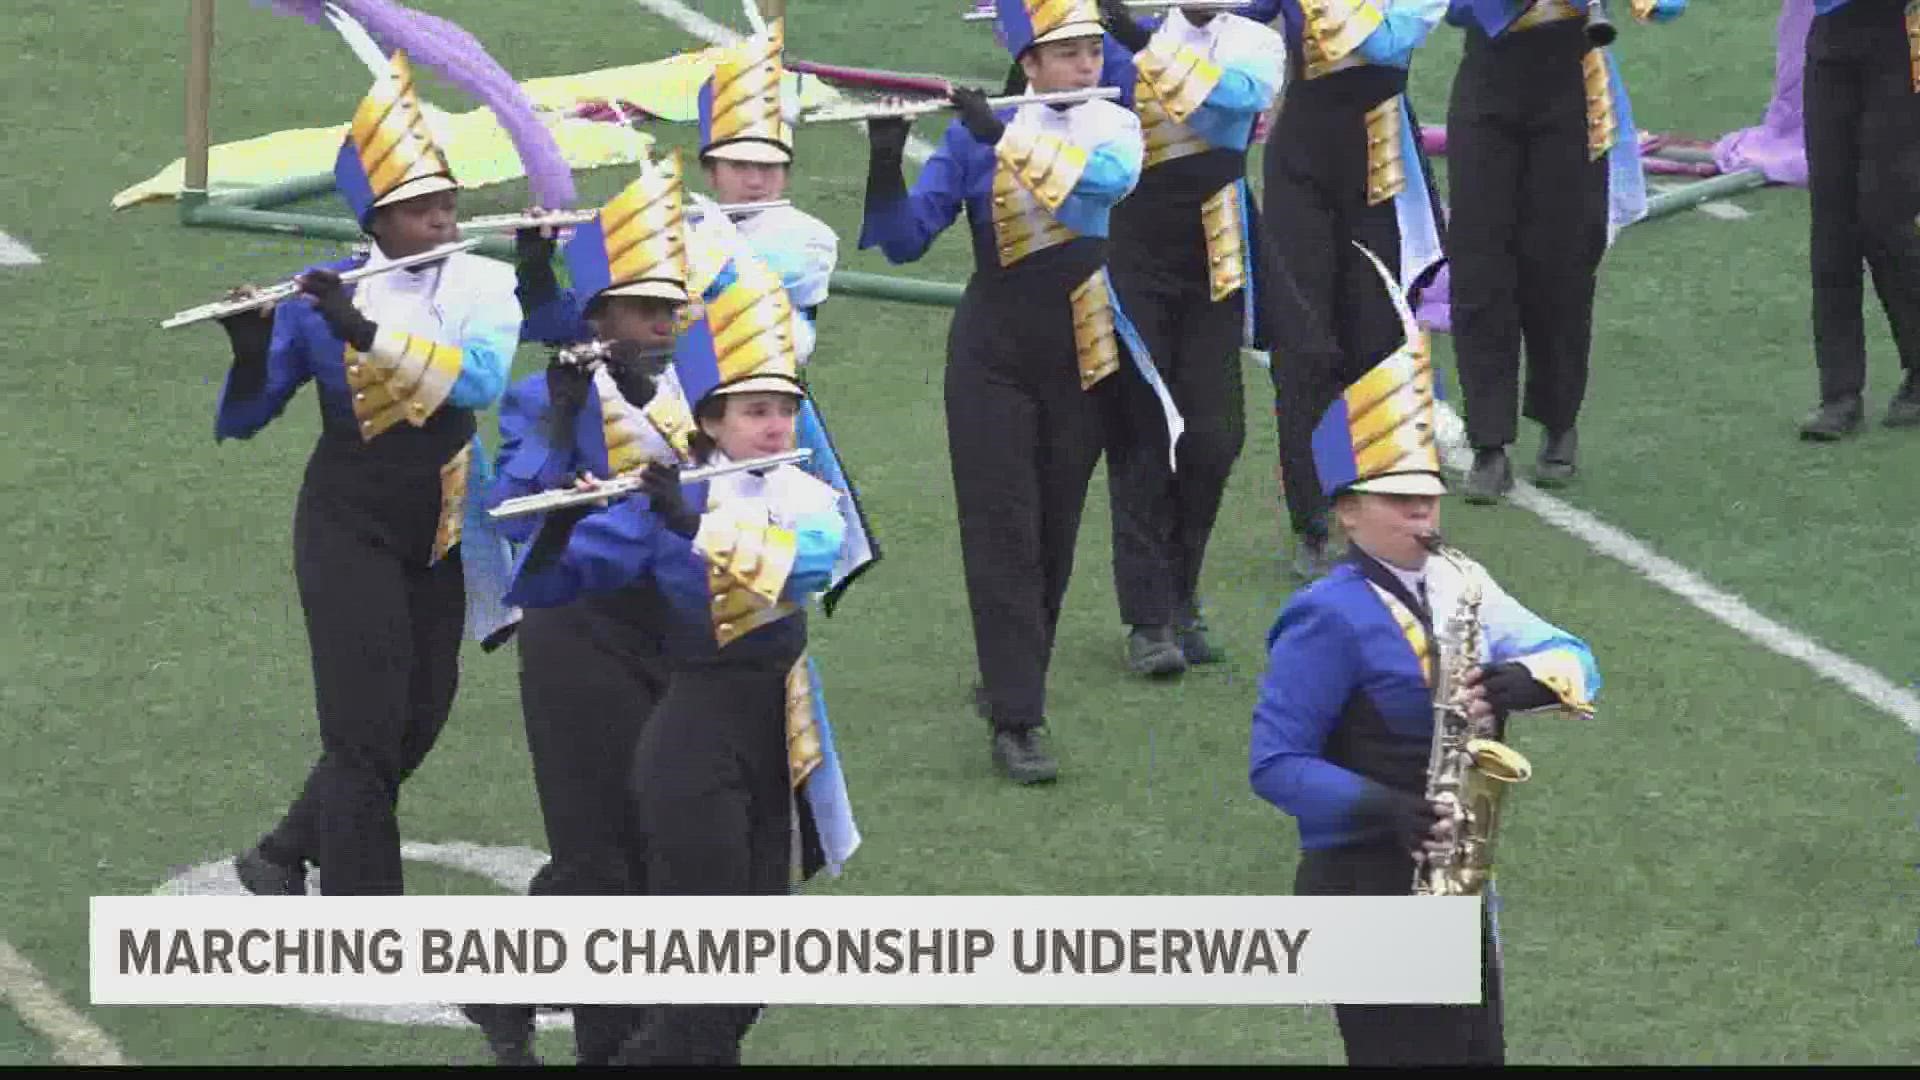 The 5A State Marching Band Championship featured 14 high schools from across South Carolina and was held at Irmo High School.